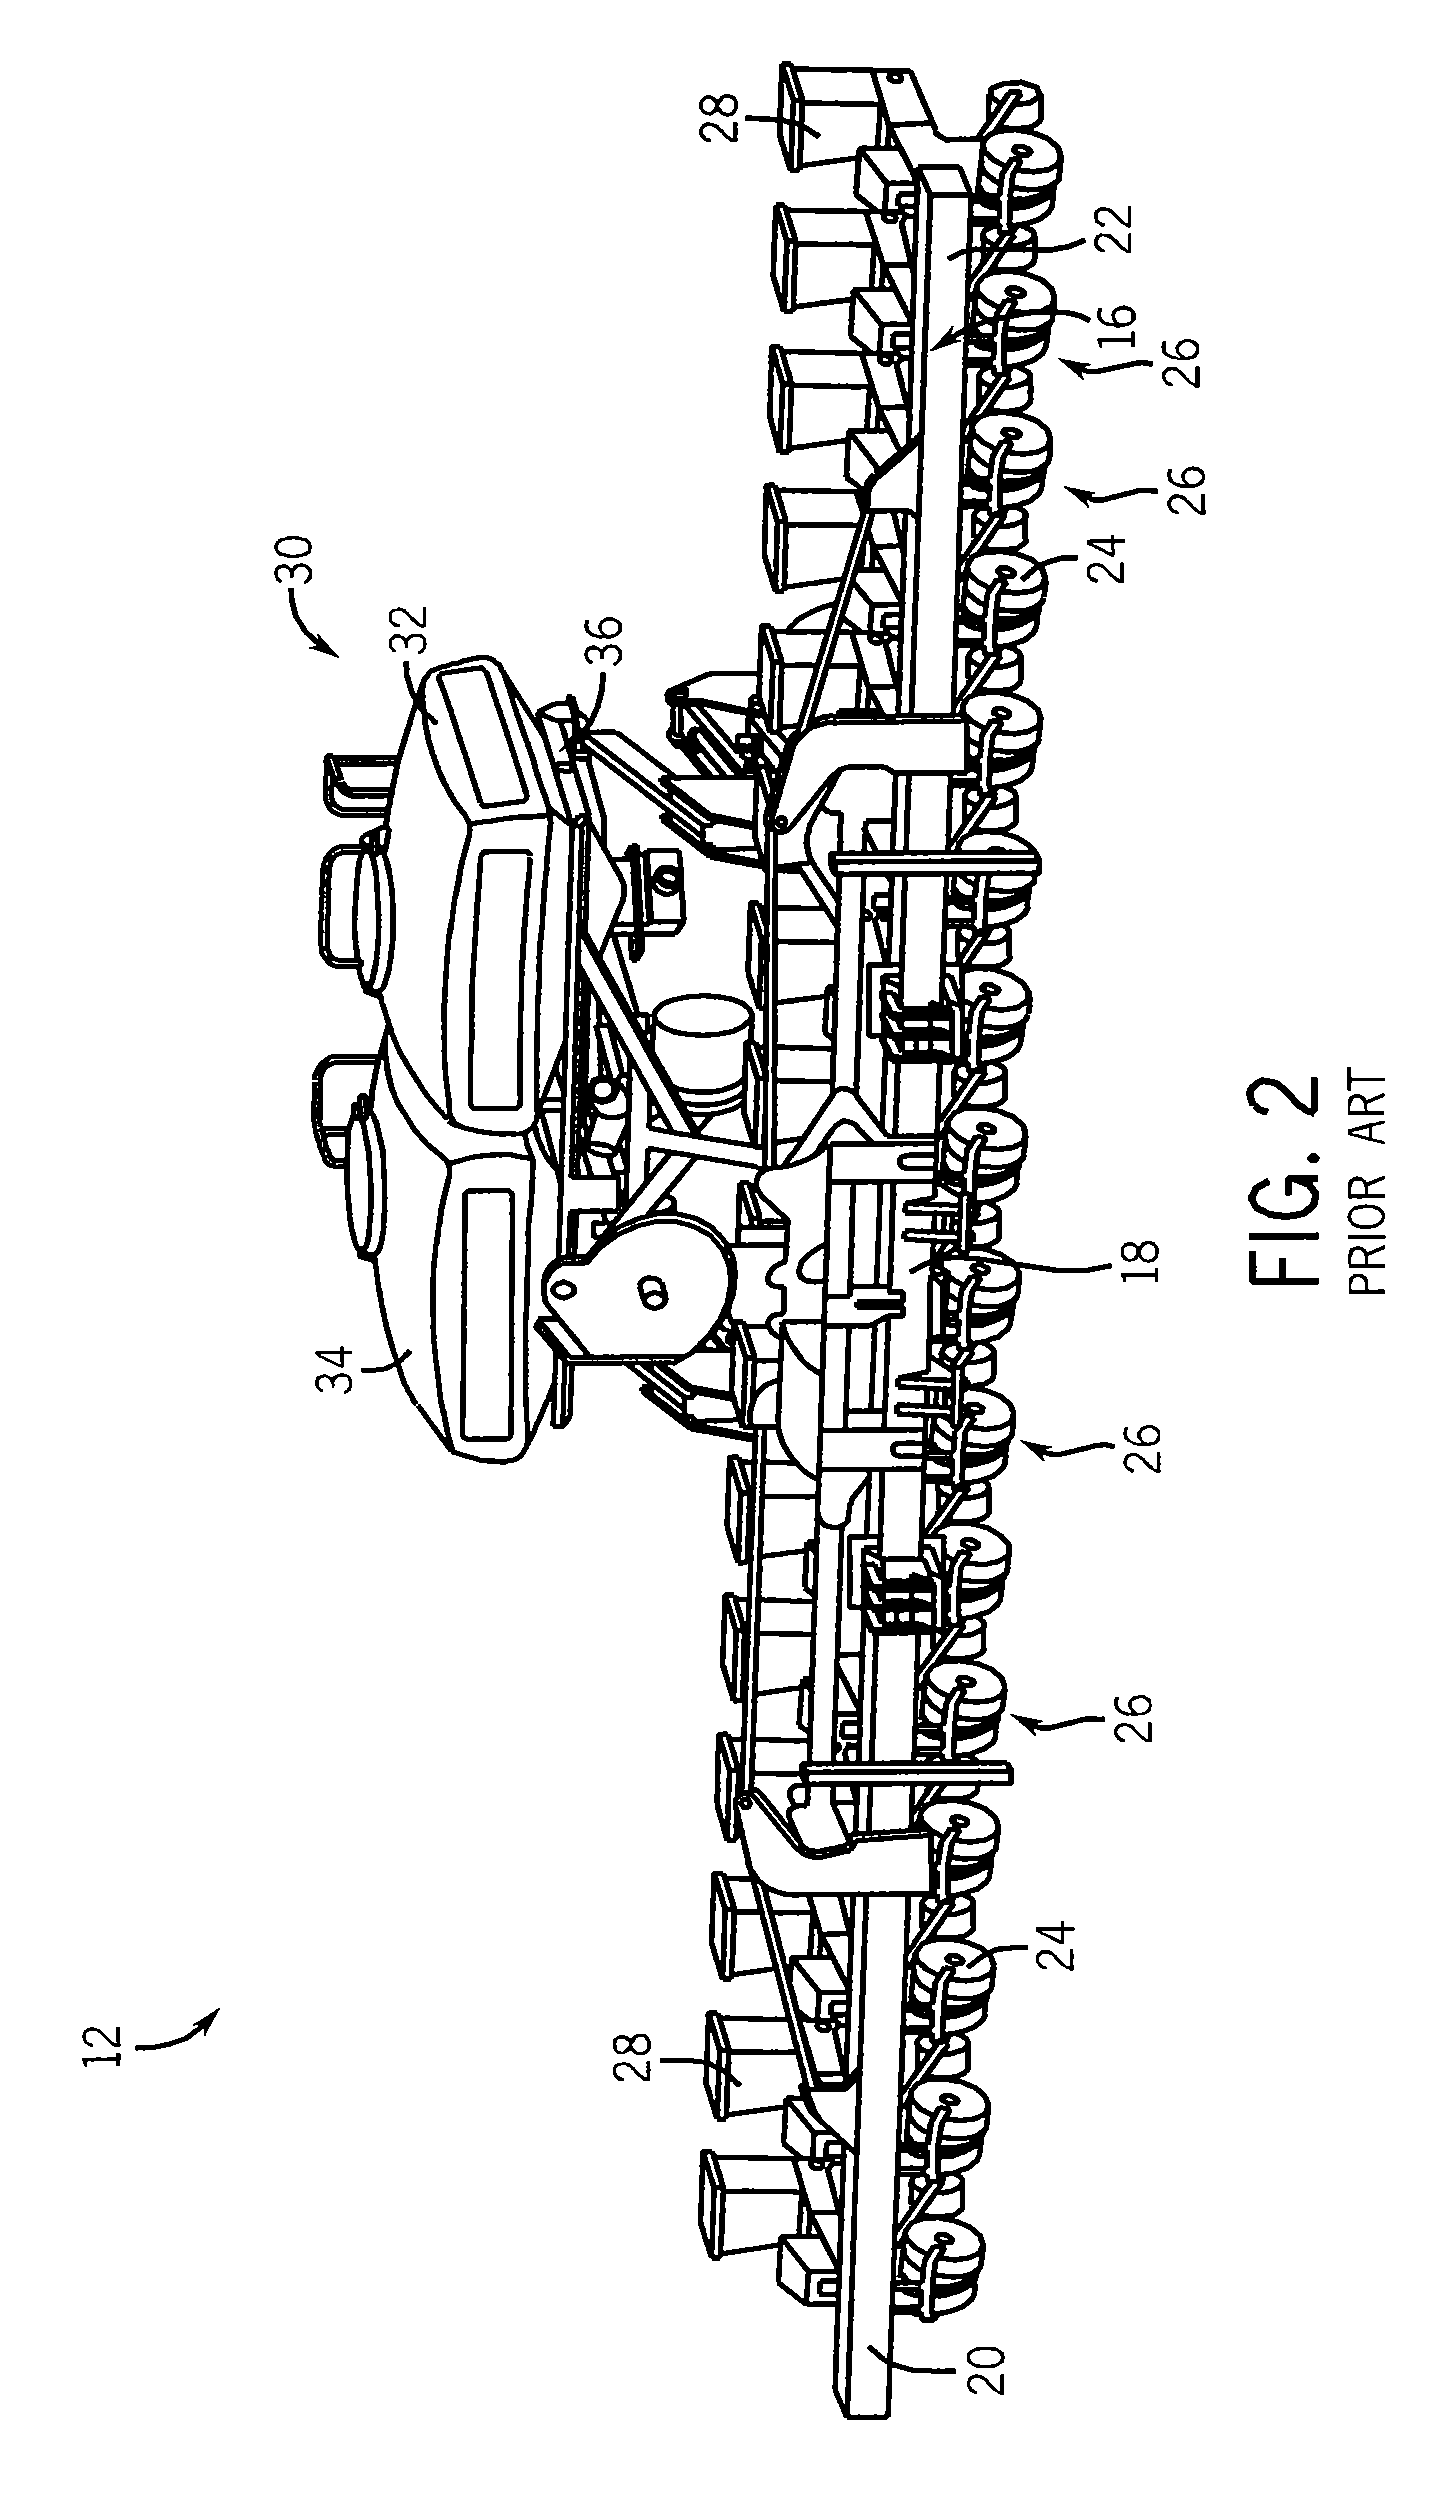 Method and apparatus for automatic positioning of gull wings of stackerbar planter based on tractor hitch position